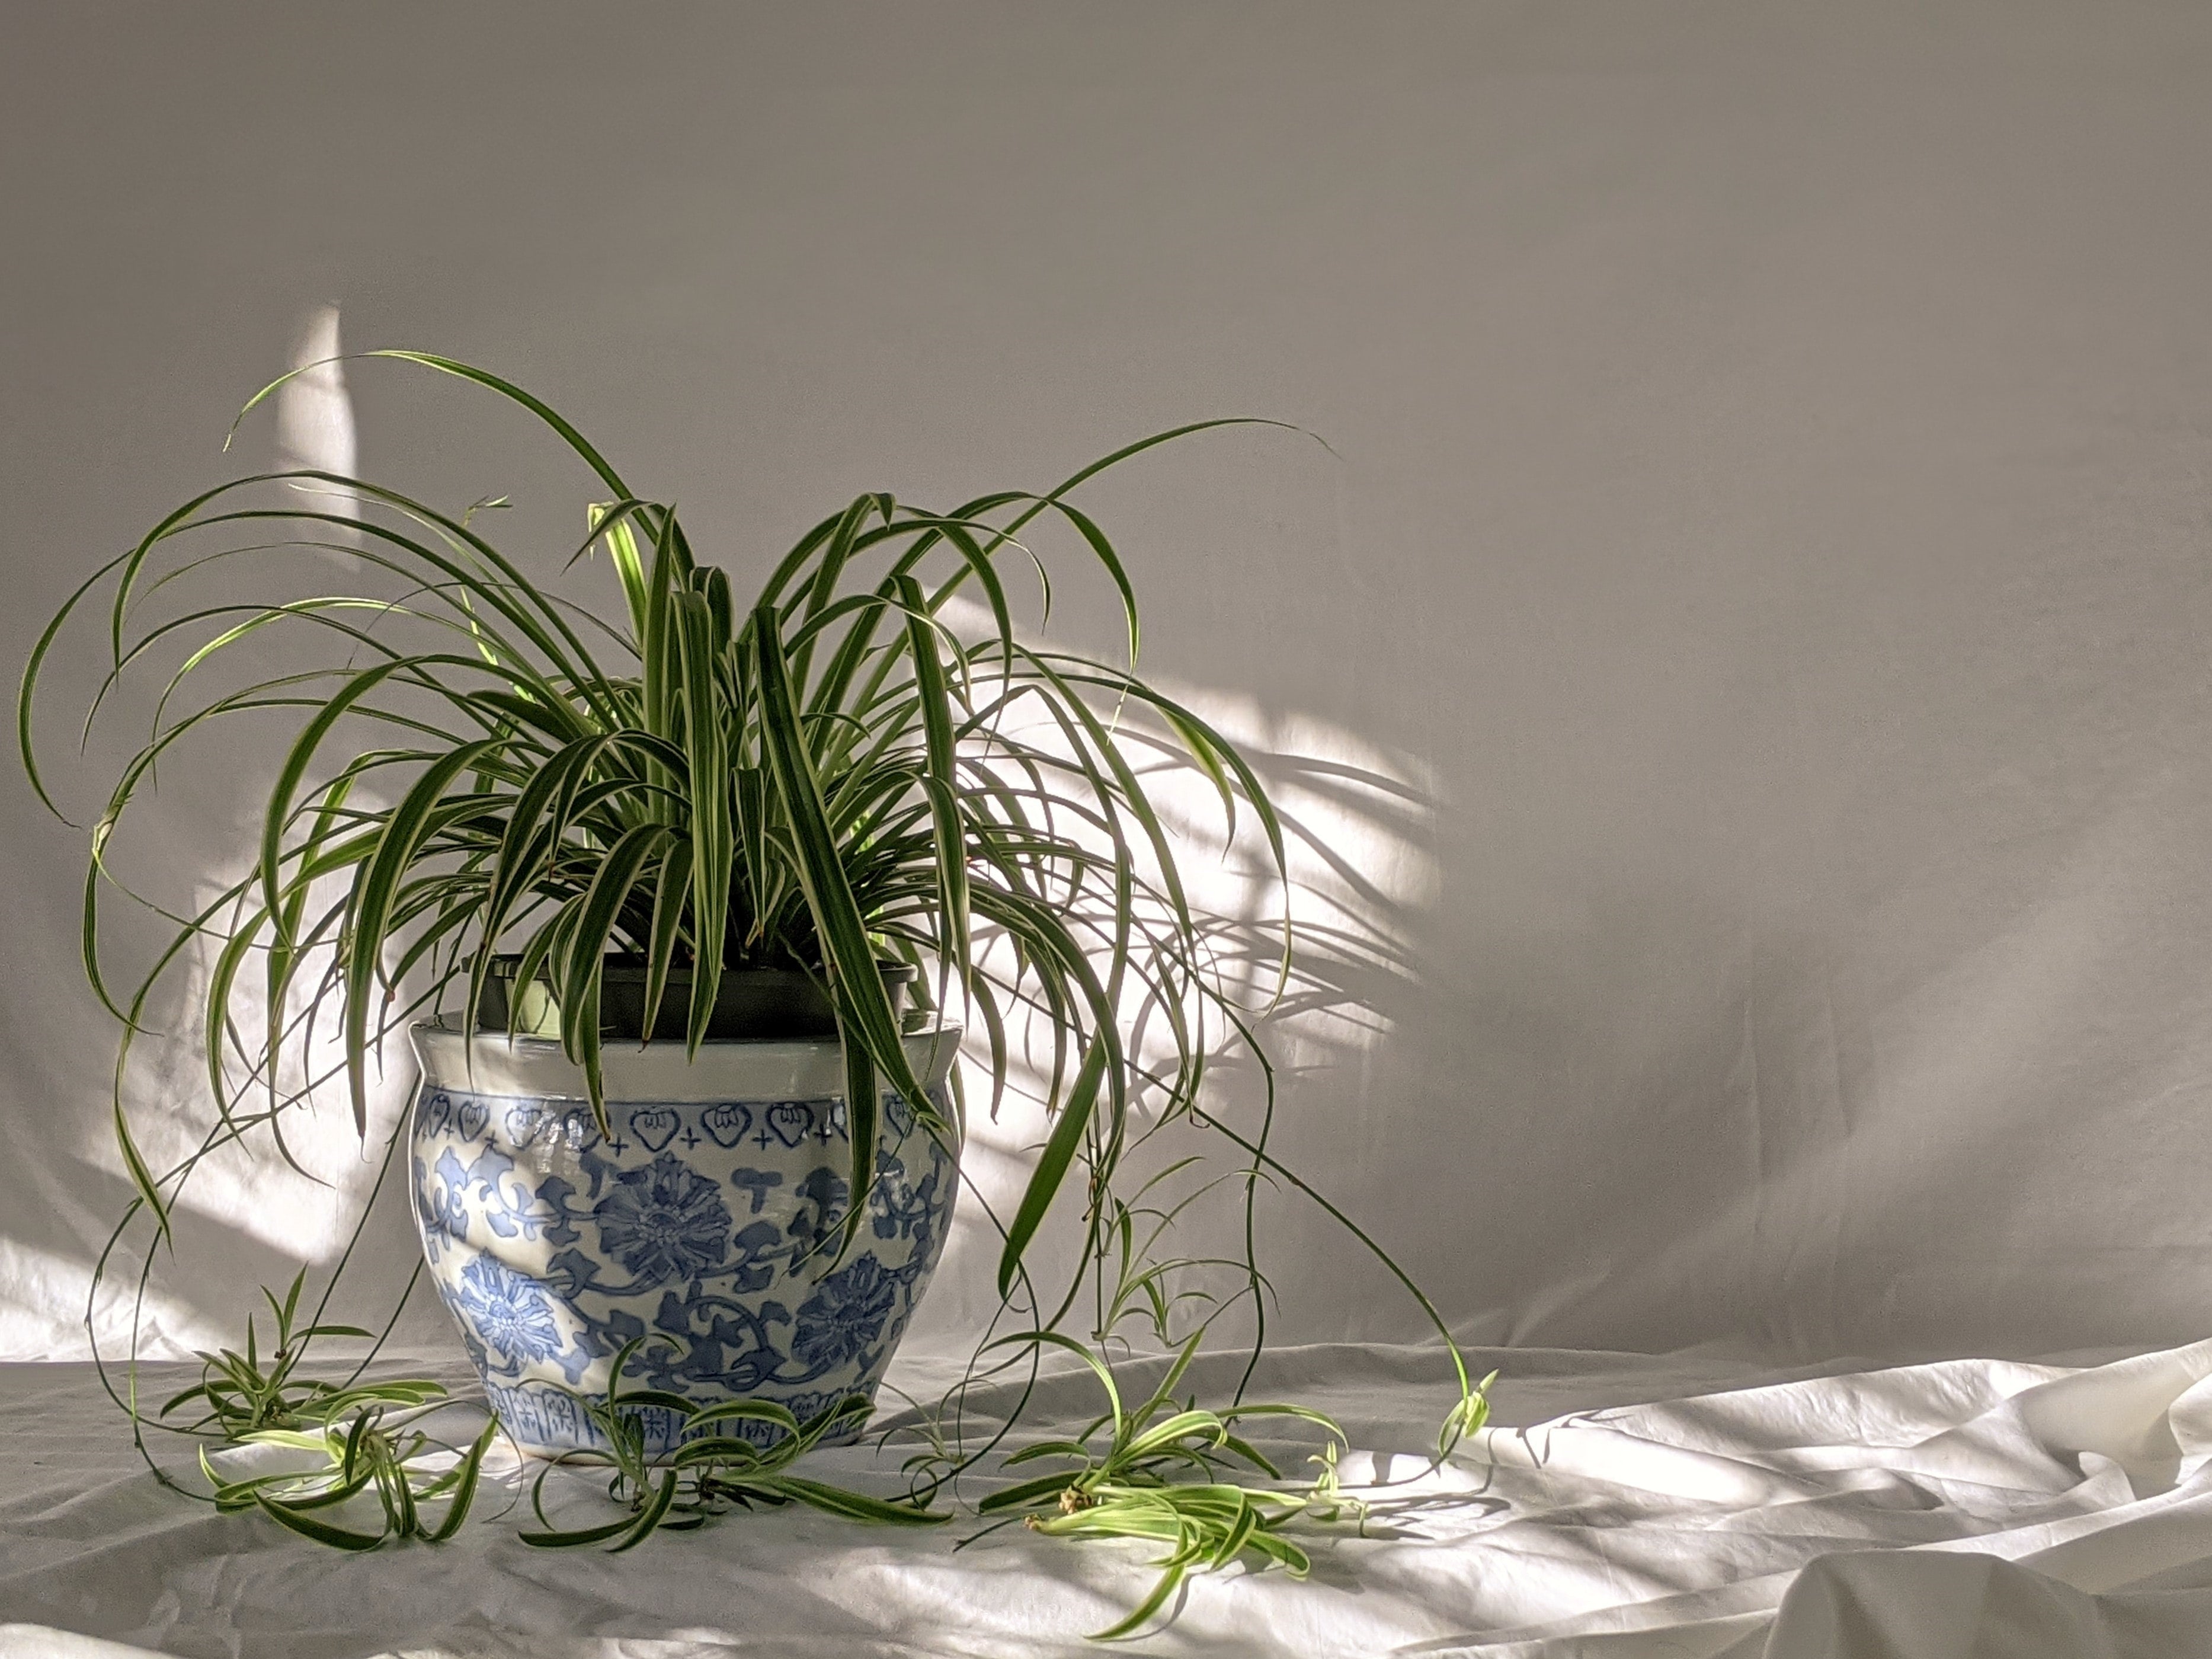 A spider plant with spiderettes, also known as plantlets.